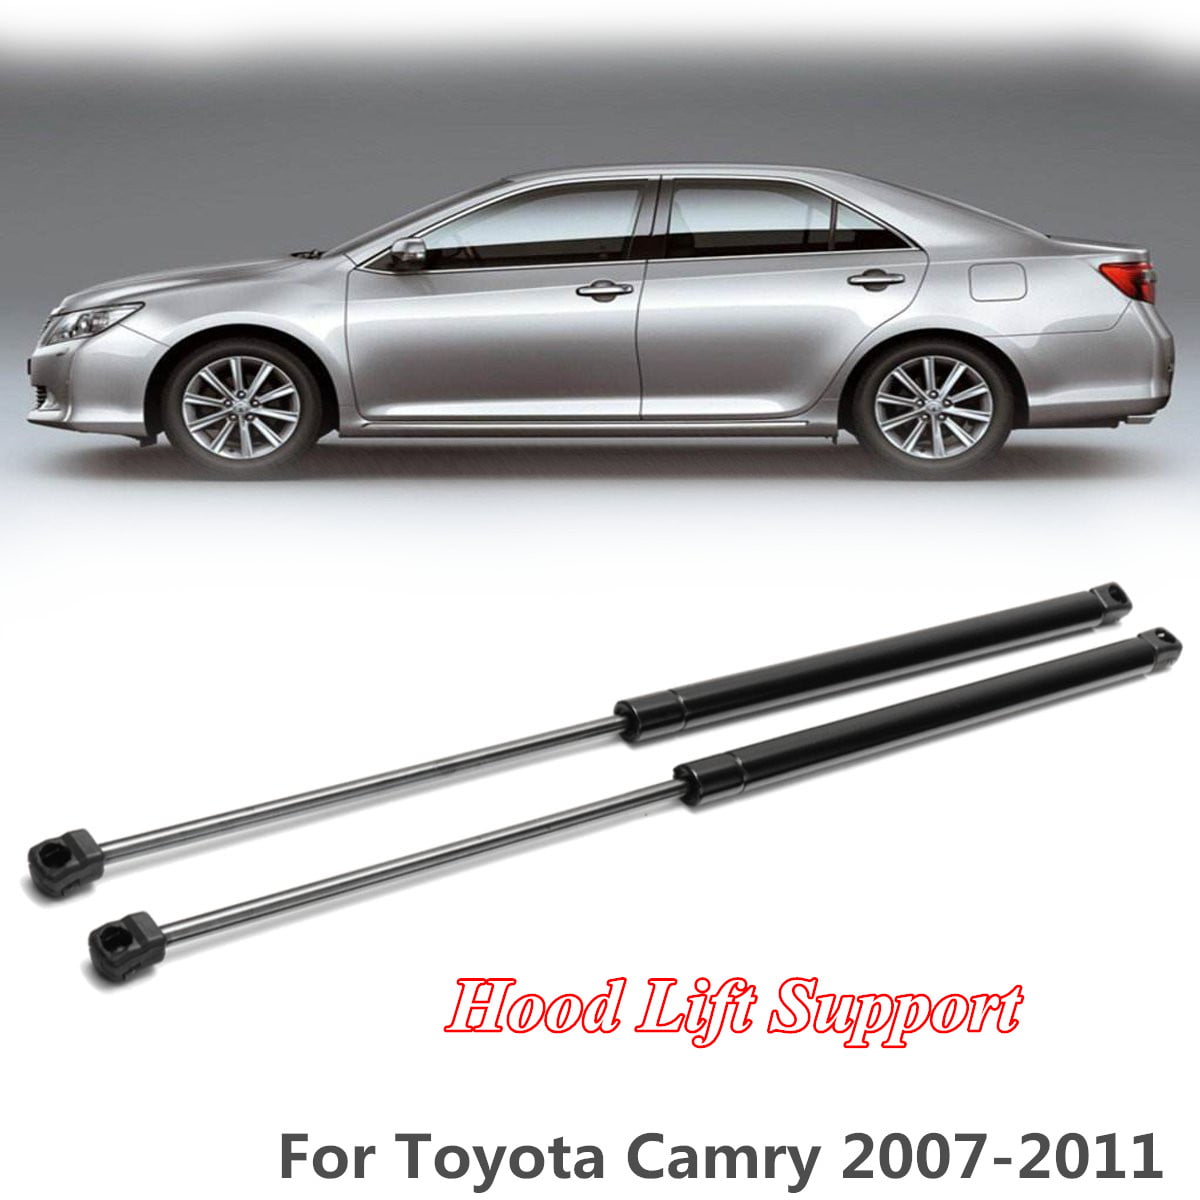 OTUAYAUTO Front Hood Strut OEM# 6333 Pack of 2 Replacement for 2007-2011 Toyota Camry Hood Lift Support 